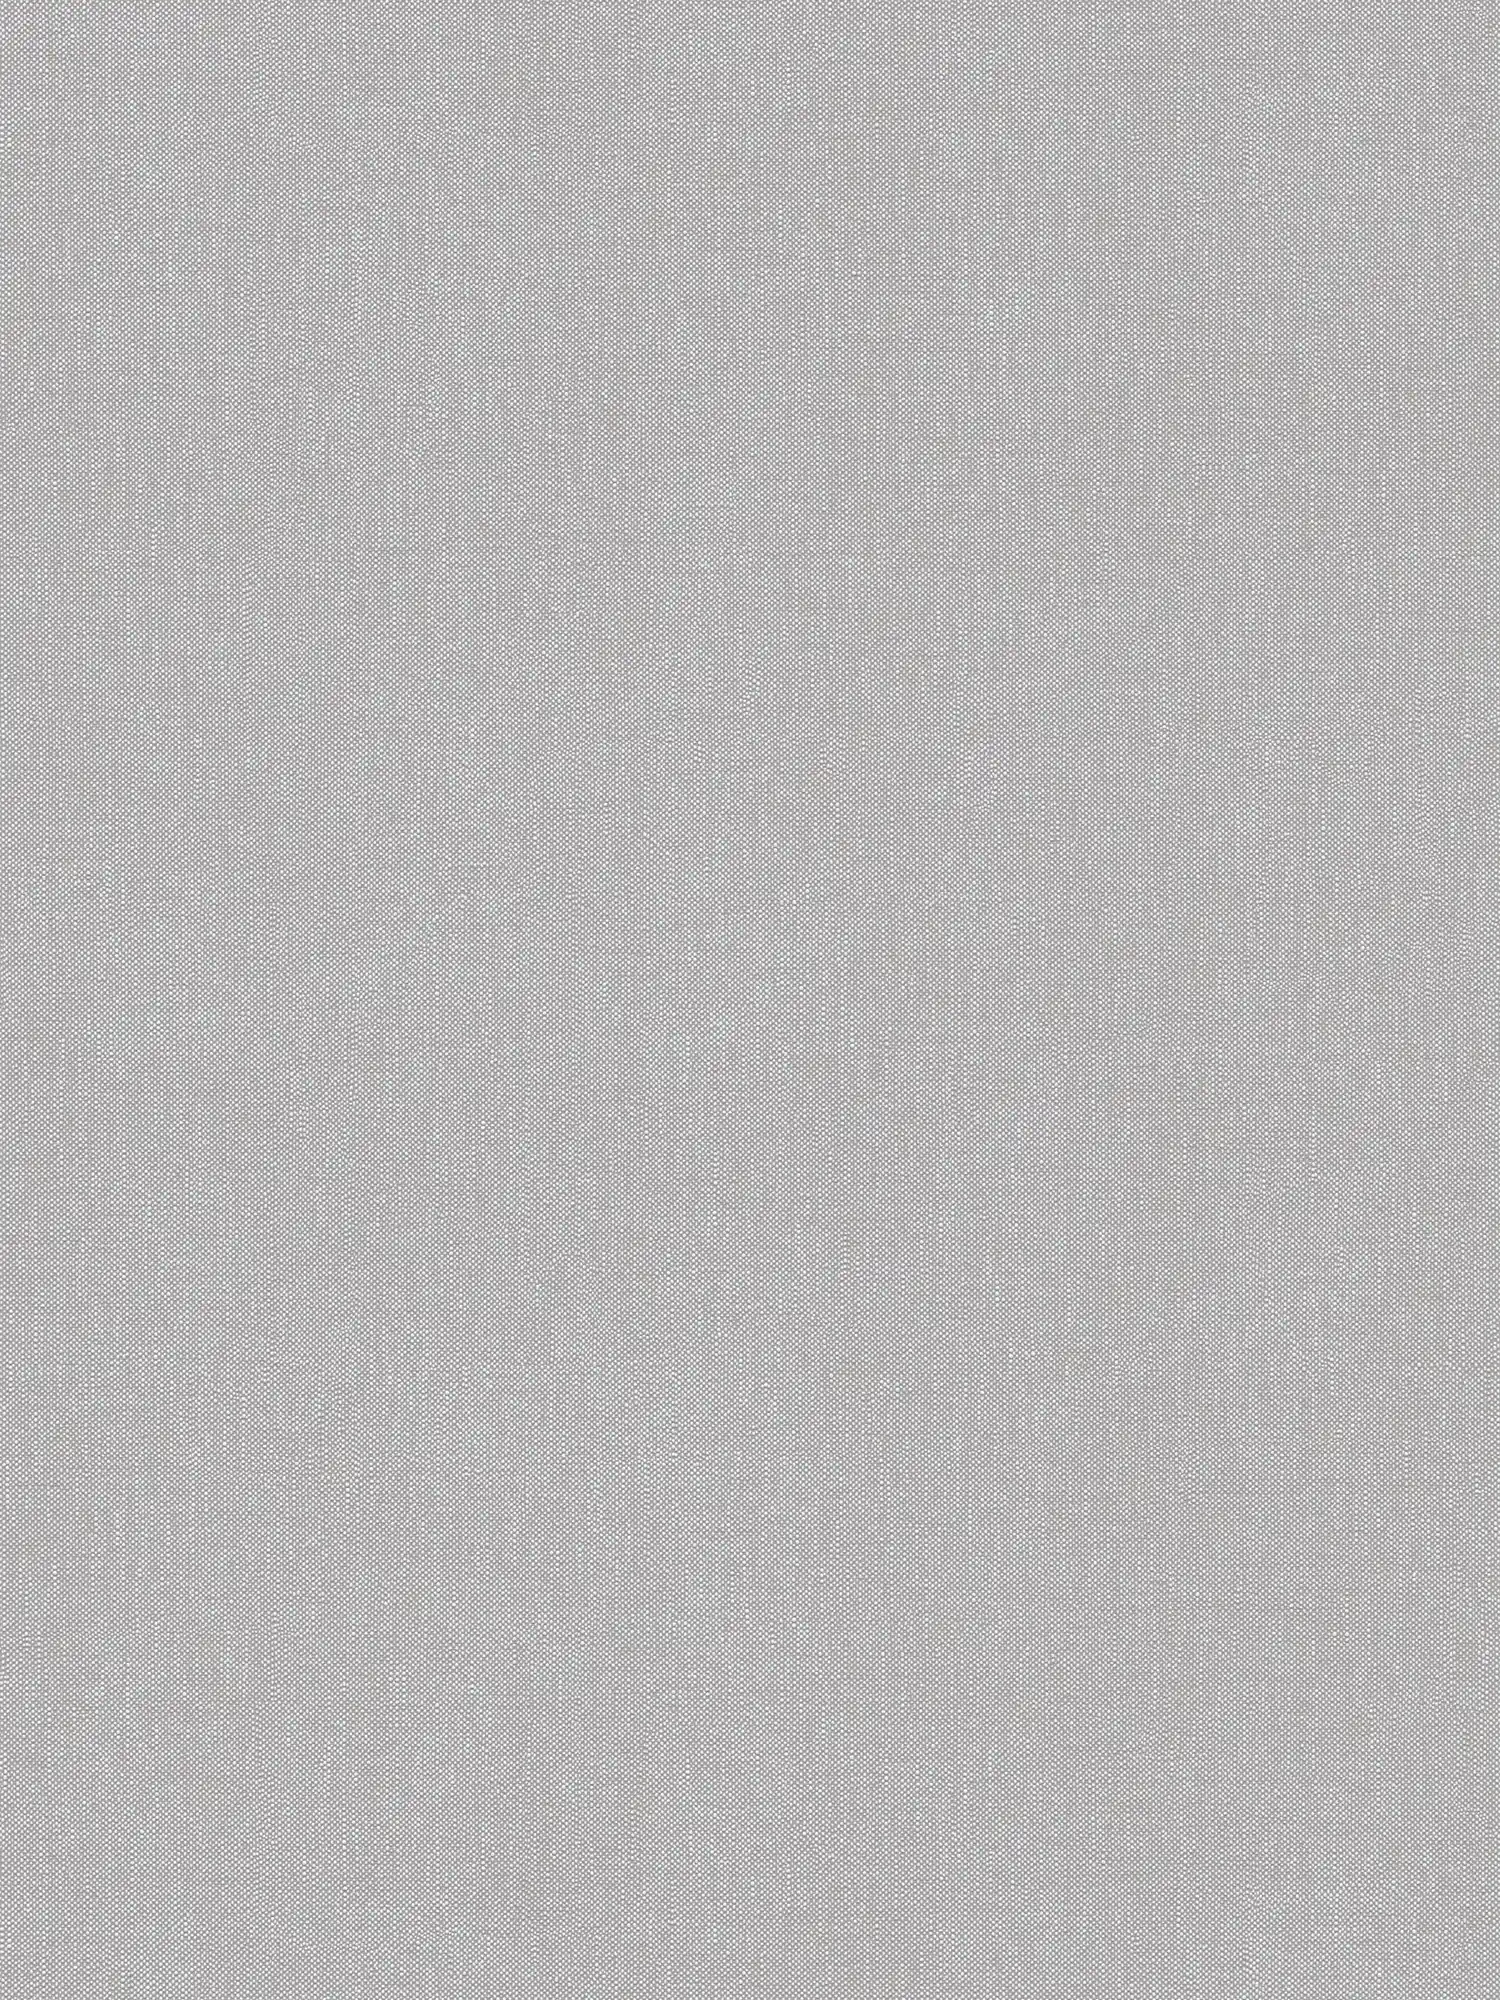 Plain wallpaper with fine structure - grey
